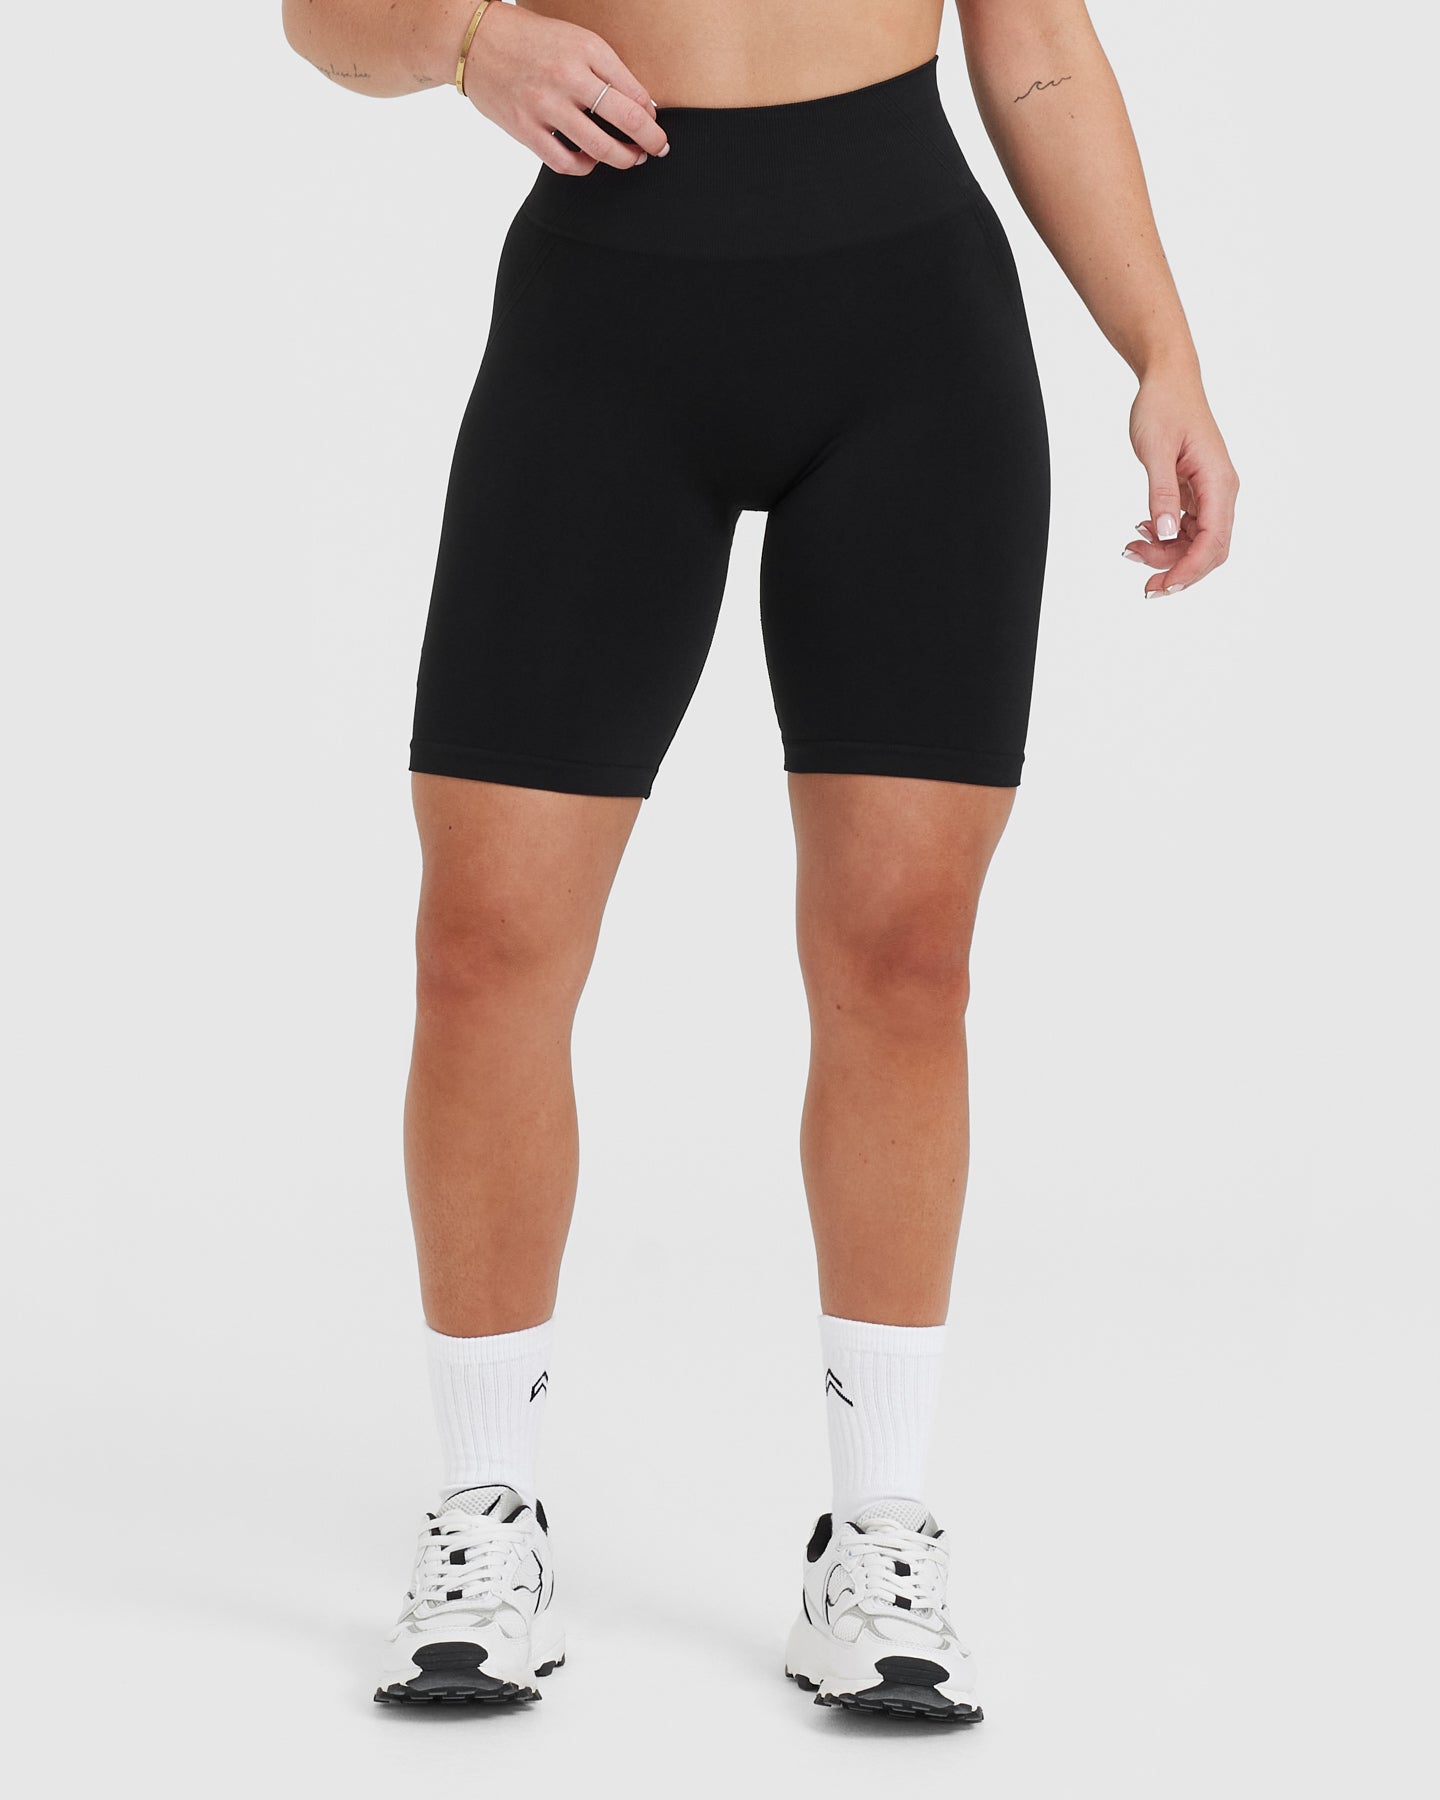 Seamless Ribbed Seamless Workout Shorts Women For Women Push Up, Tummy  Control, Ideal For Gym, Cycling, Fitness, And Biking From Depensibley,  $24.83